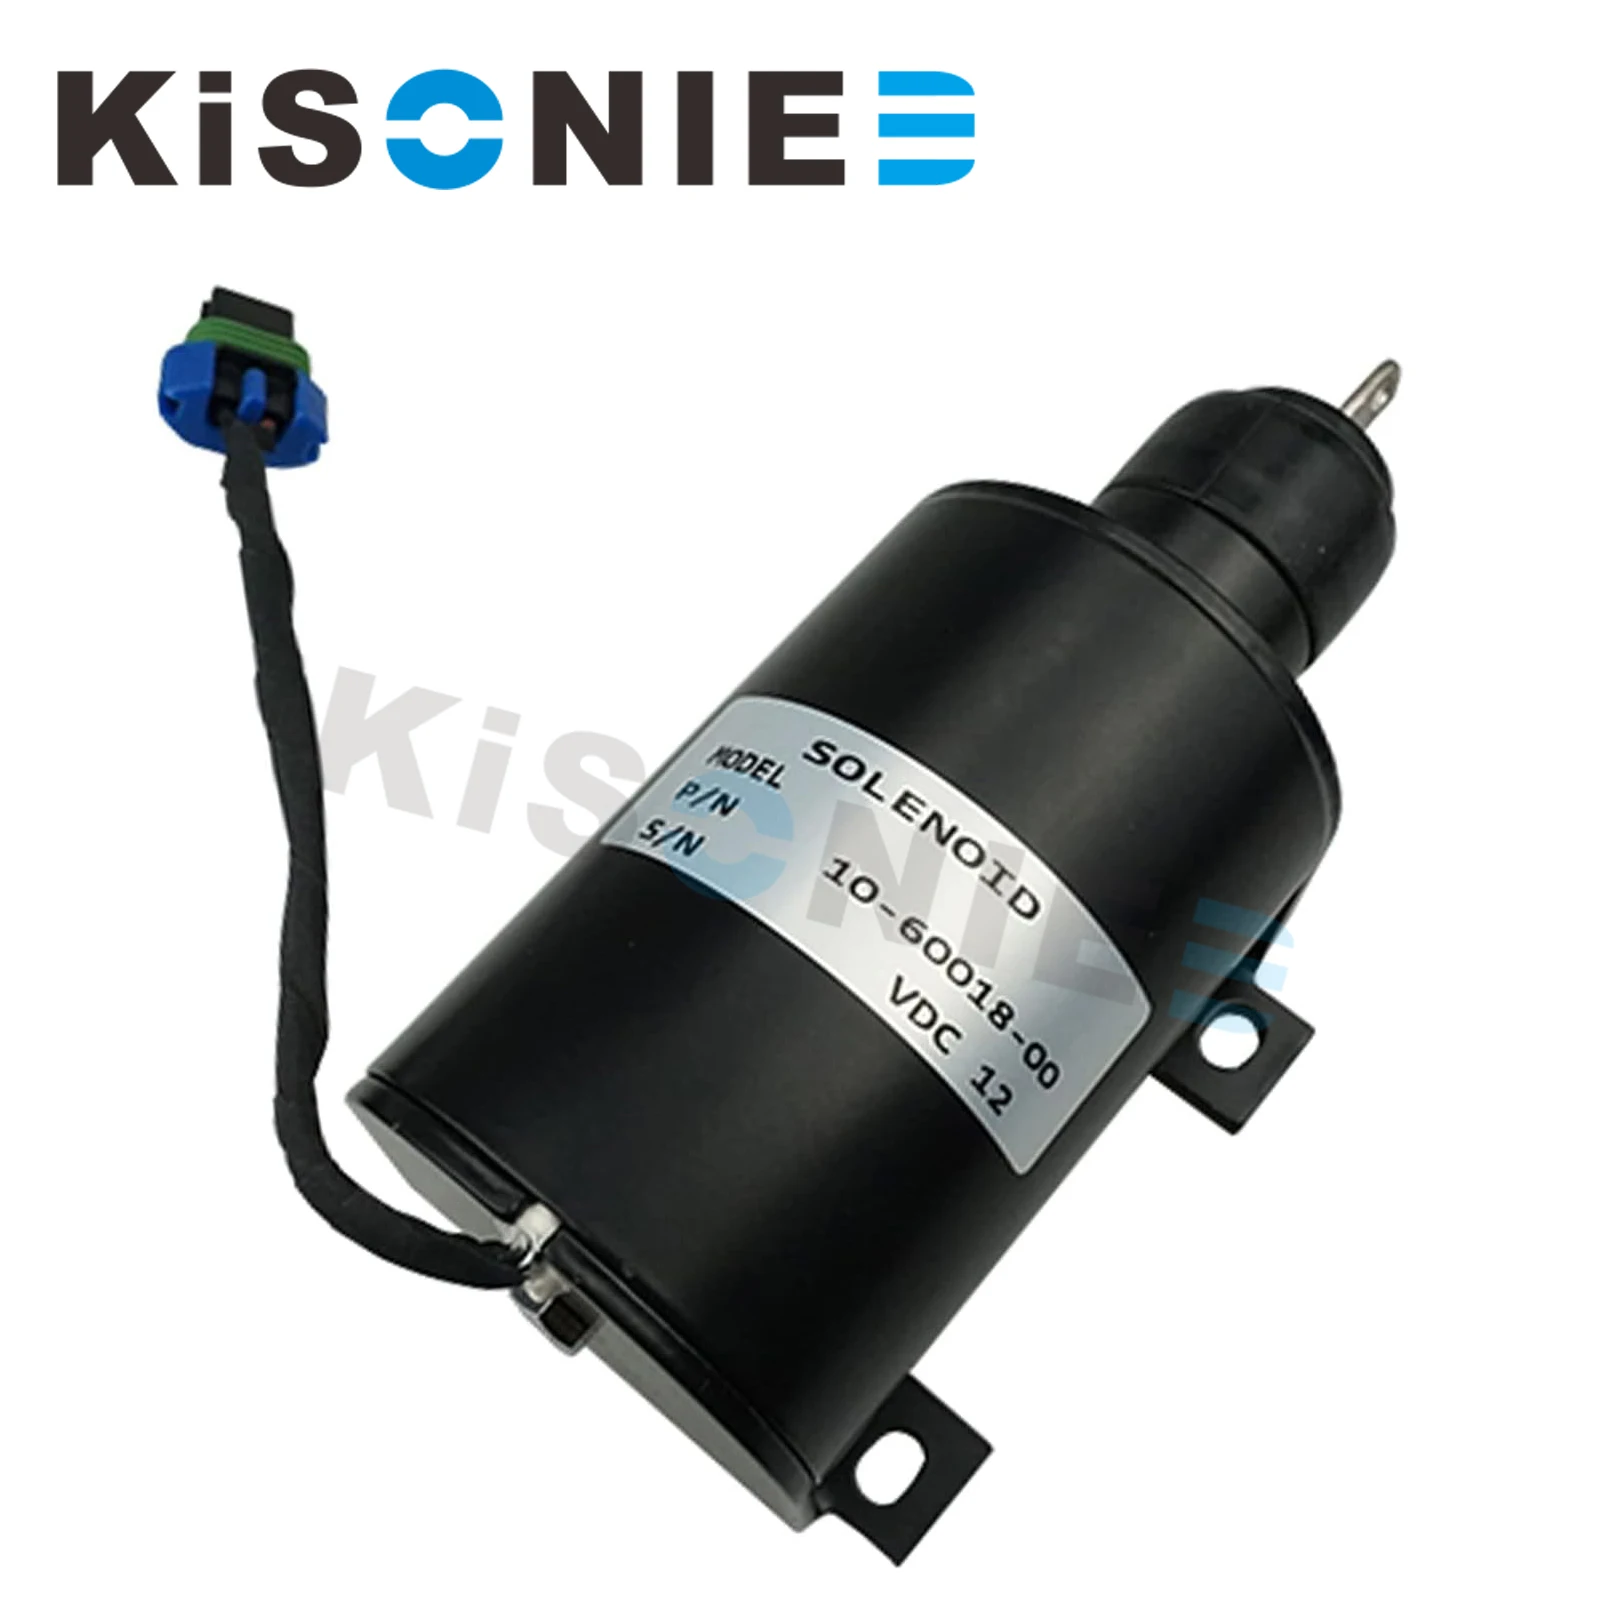 

10-66810-00 12V Speed Solenoid 10-00520-00 10-60018-00 for Carrier Transicold Supra Reefer Replace Thermo King 44-2823